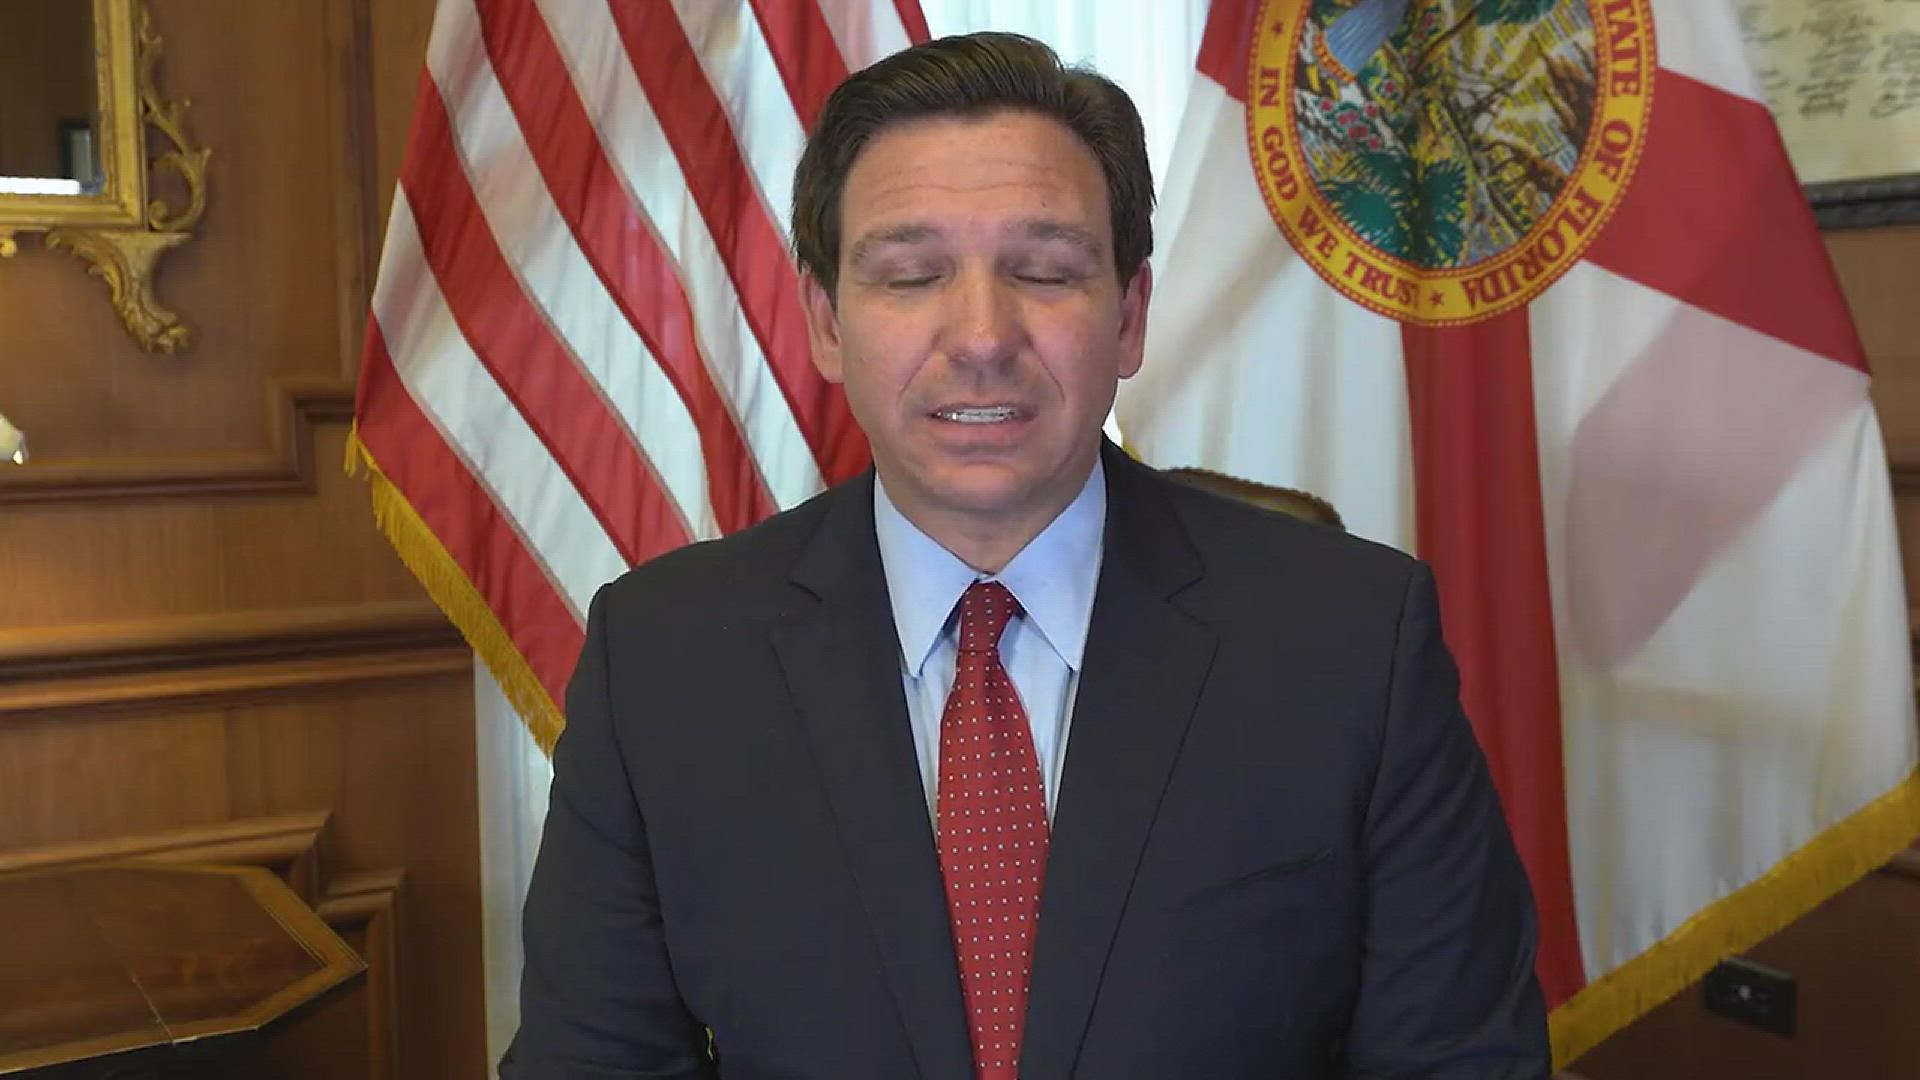 Florida Gov. Ron DeSantis made the announcement on Twitter Thursday. His wife, and First Lady, Casey was battling breast cancer.